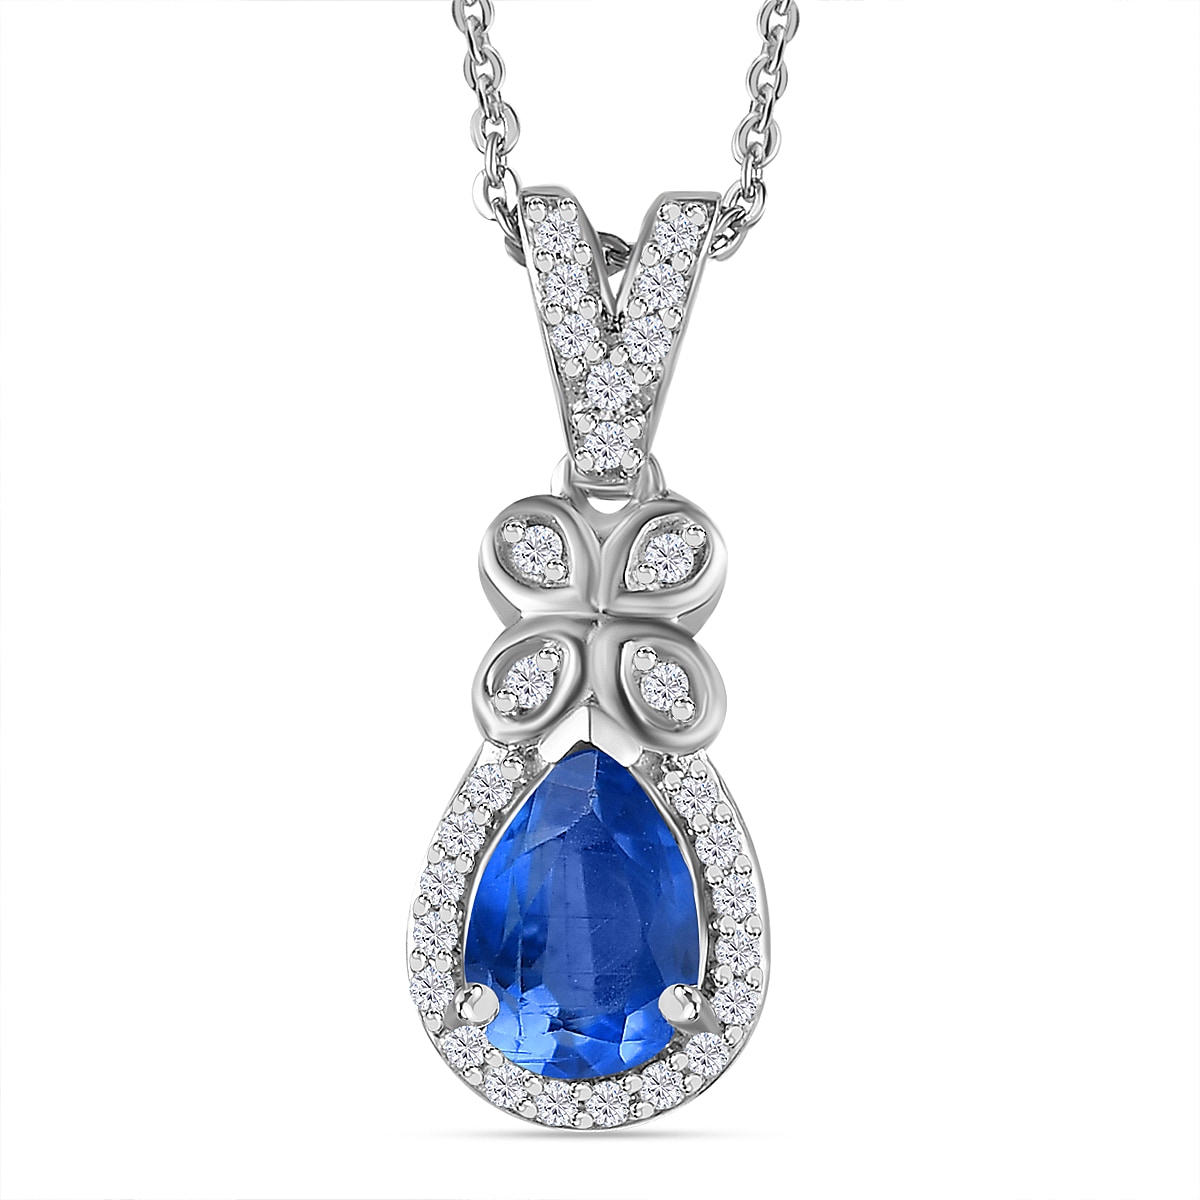 Natural Himalayan Kyanite & Natural Zircon Pendant with Chain (Size 20) in Platinum Overlay Sterling Silver 1.15 Ct.